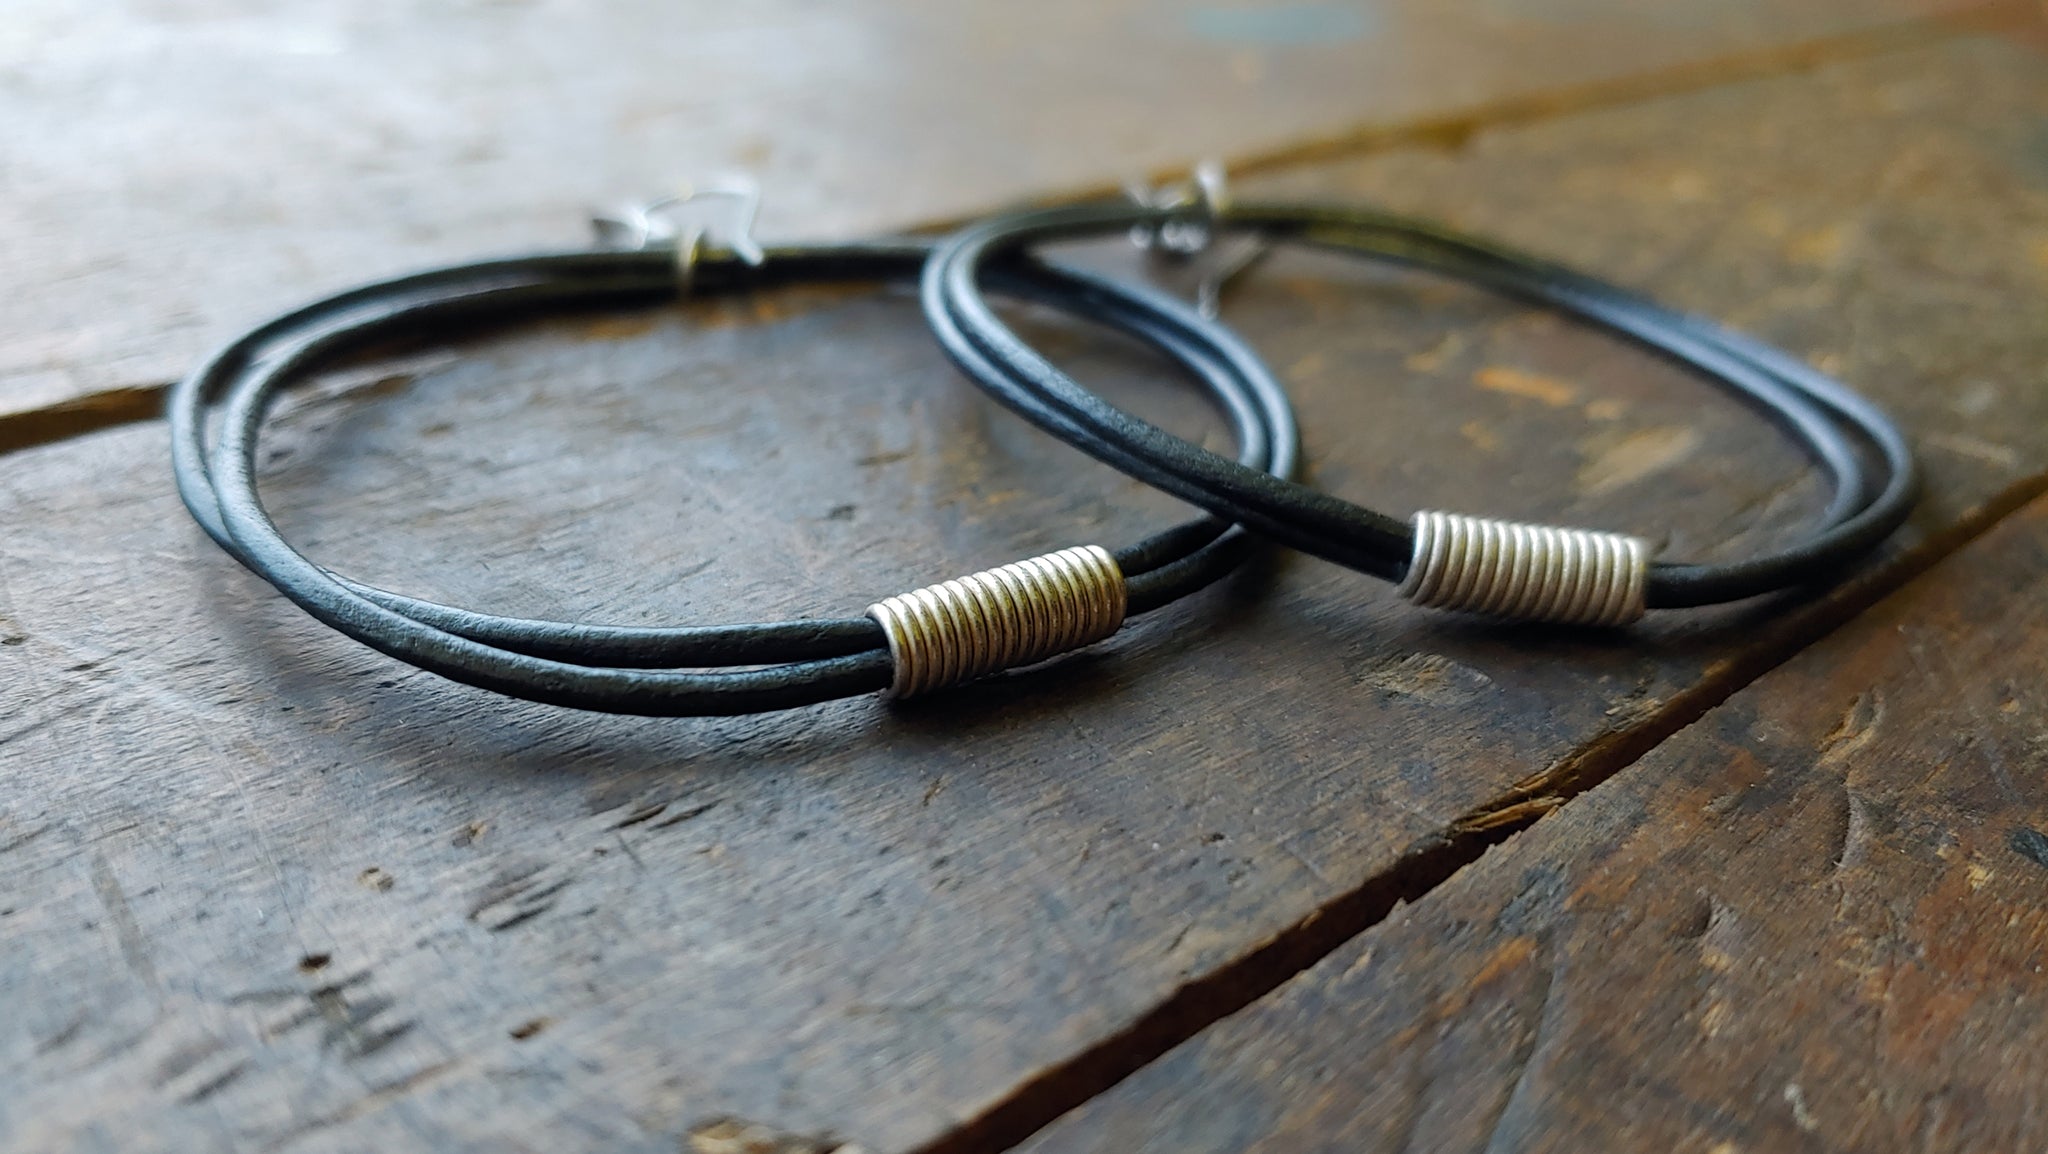 Oki leather cord earrings with handmade silver African spiral beads in gunmetal metallic round leather cord